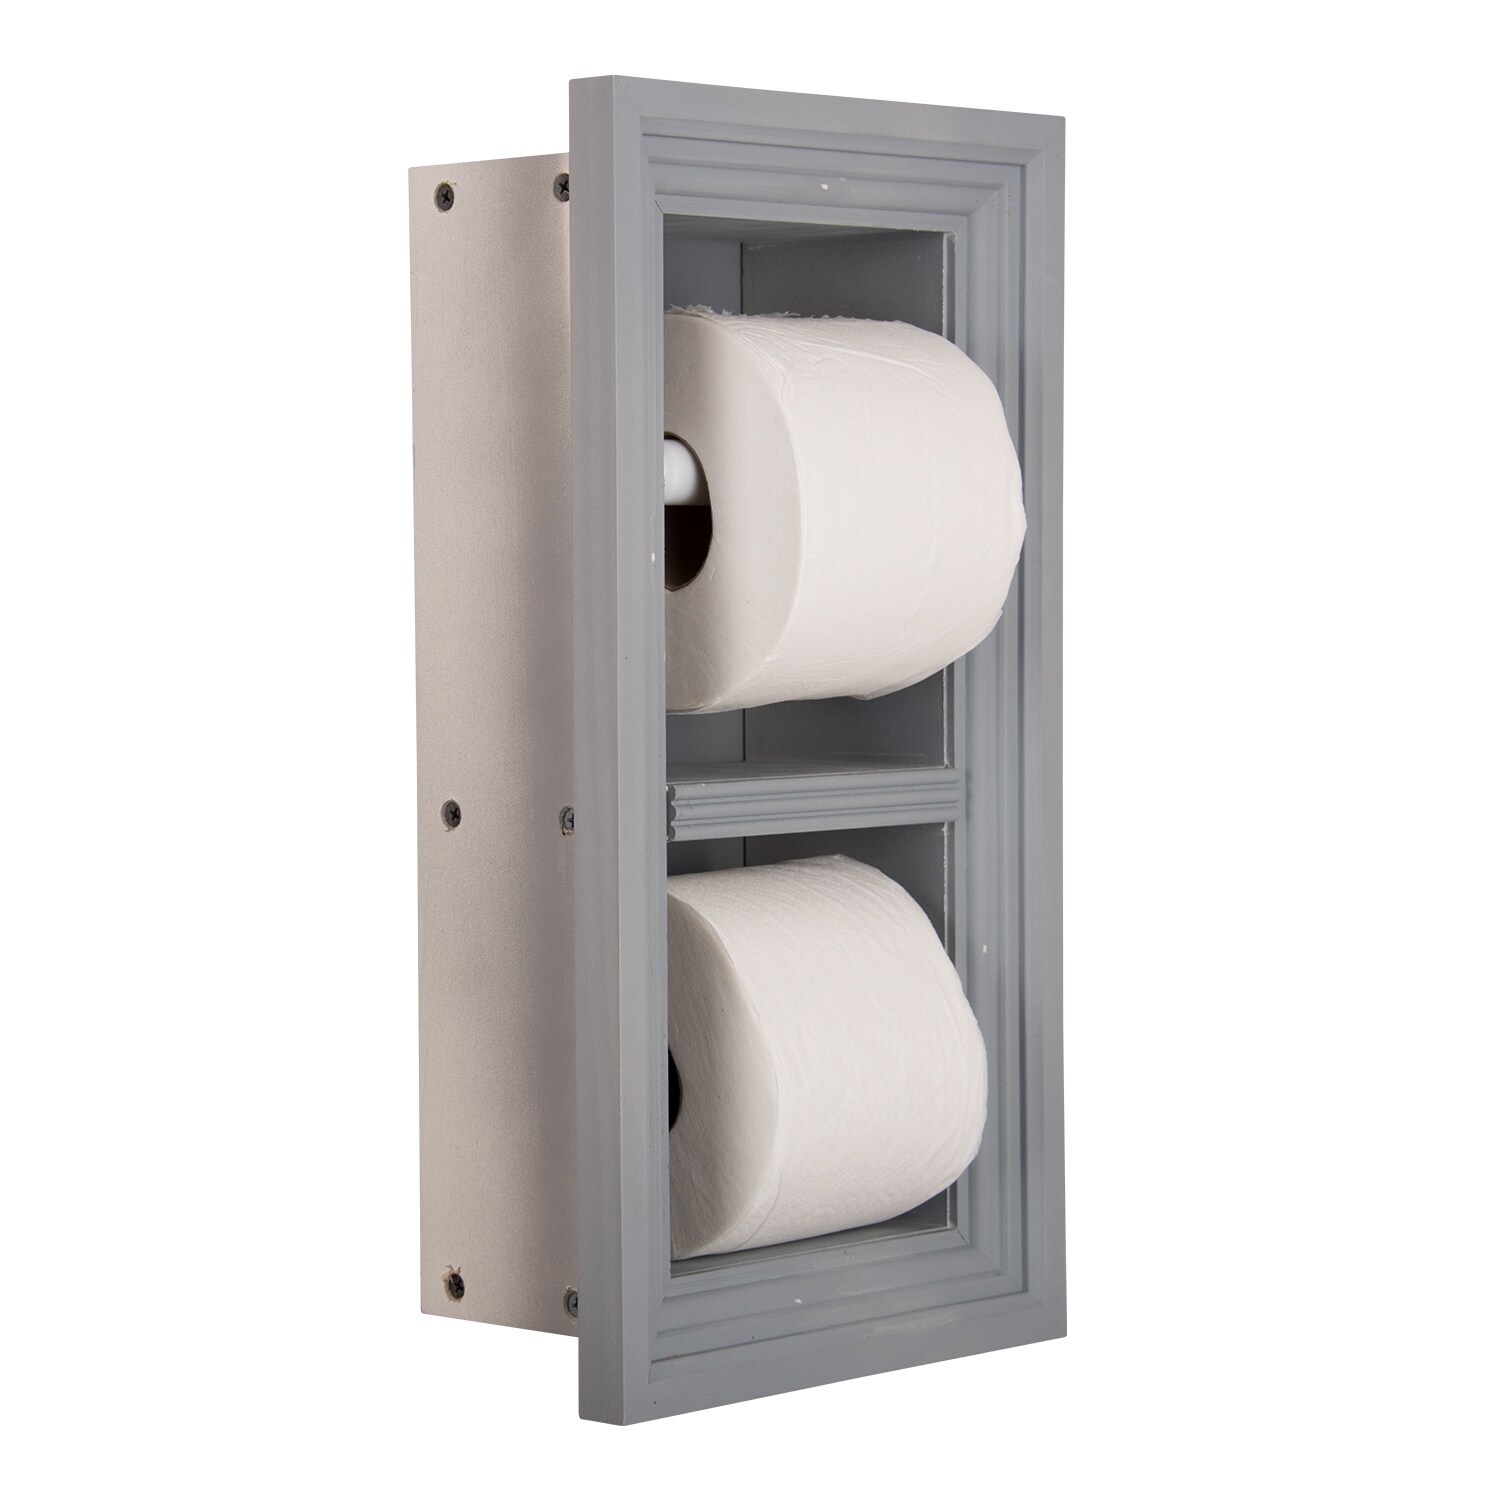 https://ak1.ostkcdn.com/images/products/16341067/Solid-Wood-Recessed-in-wall-Bathroom-Double-Toilet-Paper-Holder-Multiple-Finishes-3ada7e6b-246c-4dc6-a015-46590a3c7a63.jpg